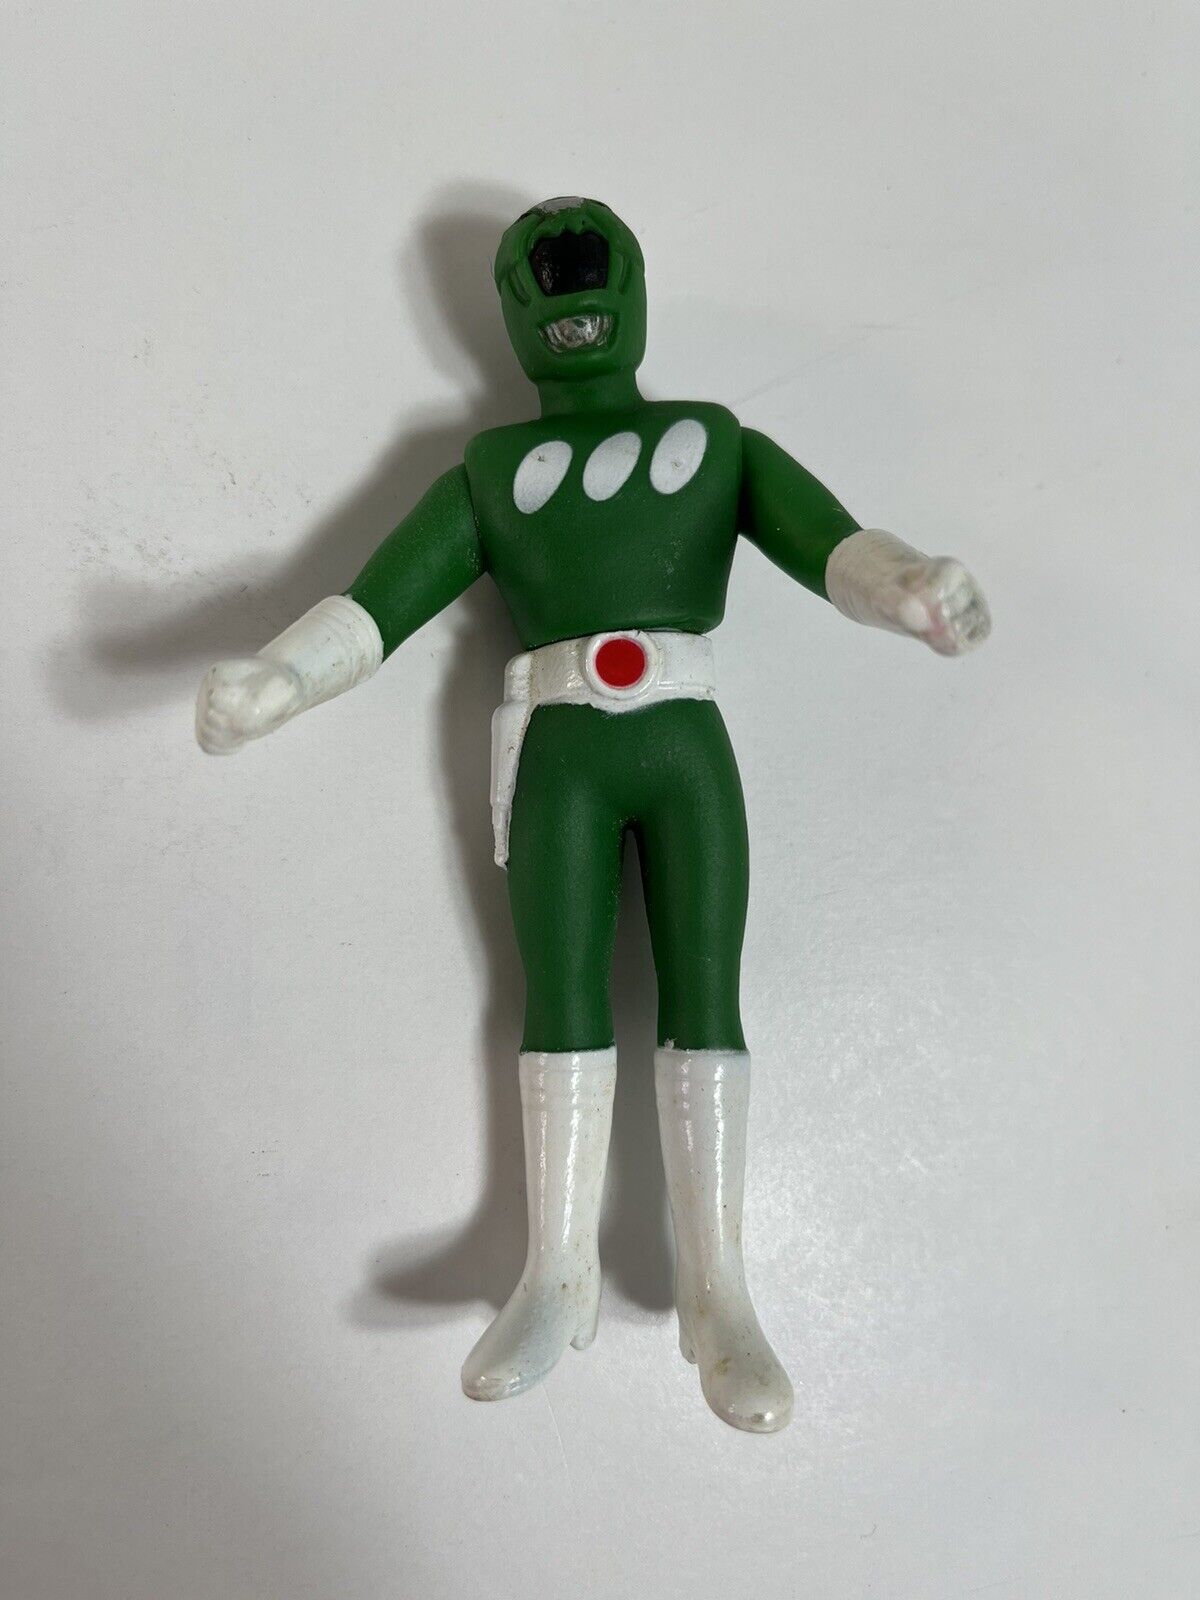 Rare Vintage 90s 4.5" Green Power Ranger Knock Off Action Figure Silicone/Rubber